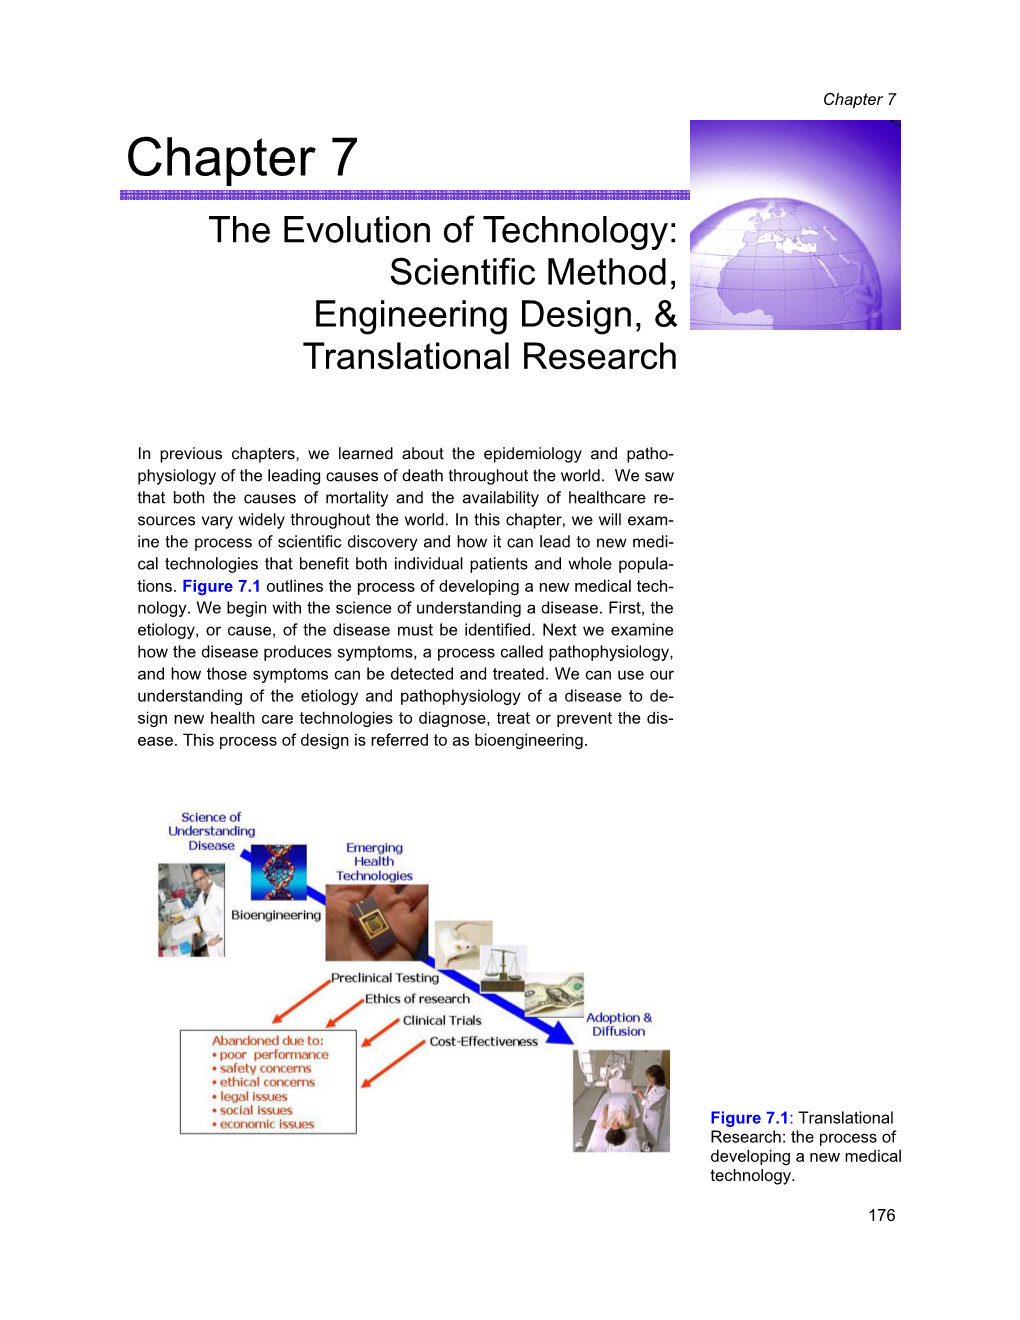 Chapter 7 Chapter 7 the Evolution of Technology: Scientific Method, Engineering Design, & Translational Research